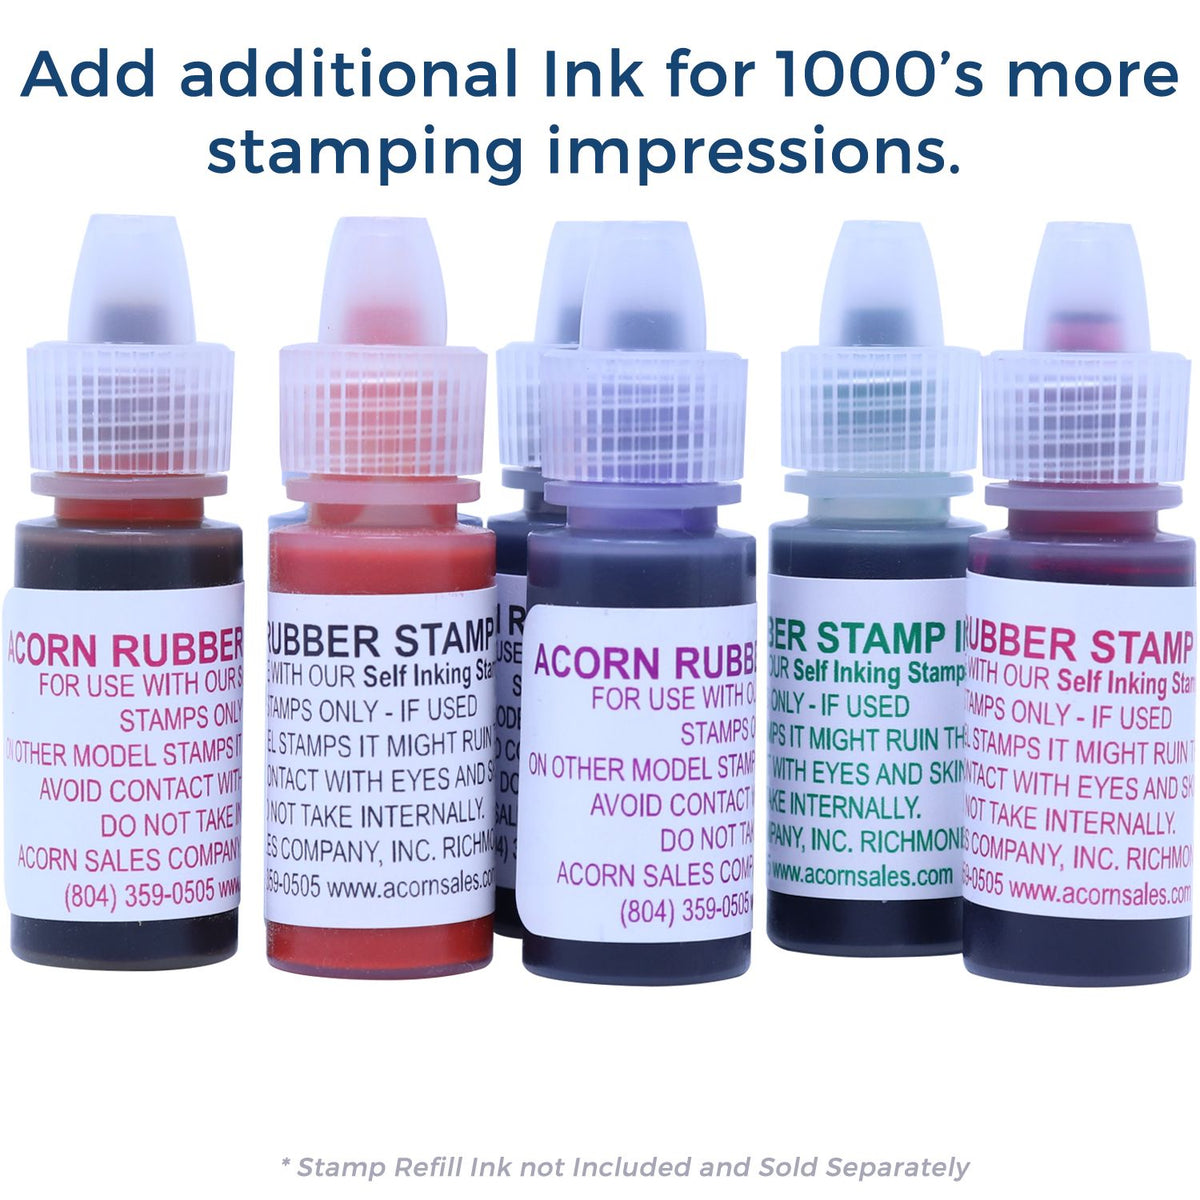 Refill Ink for Self-Inking Round Calm Smiley Stamp Available